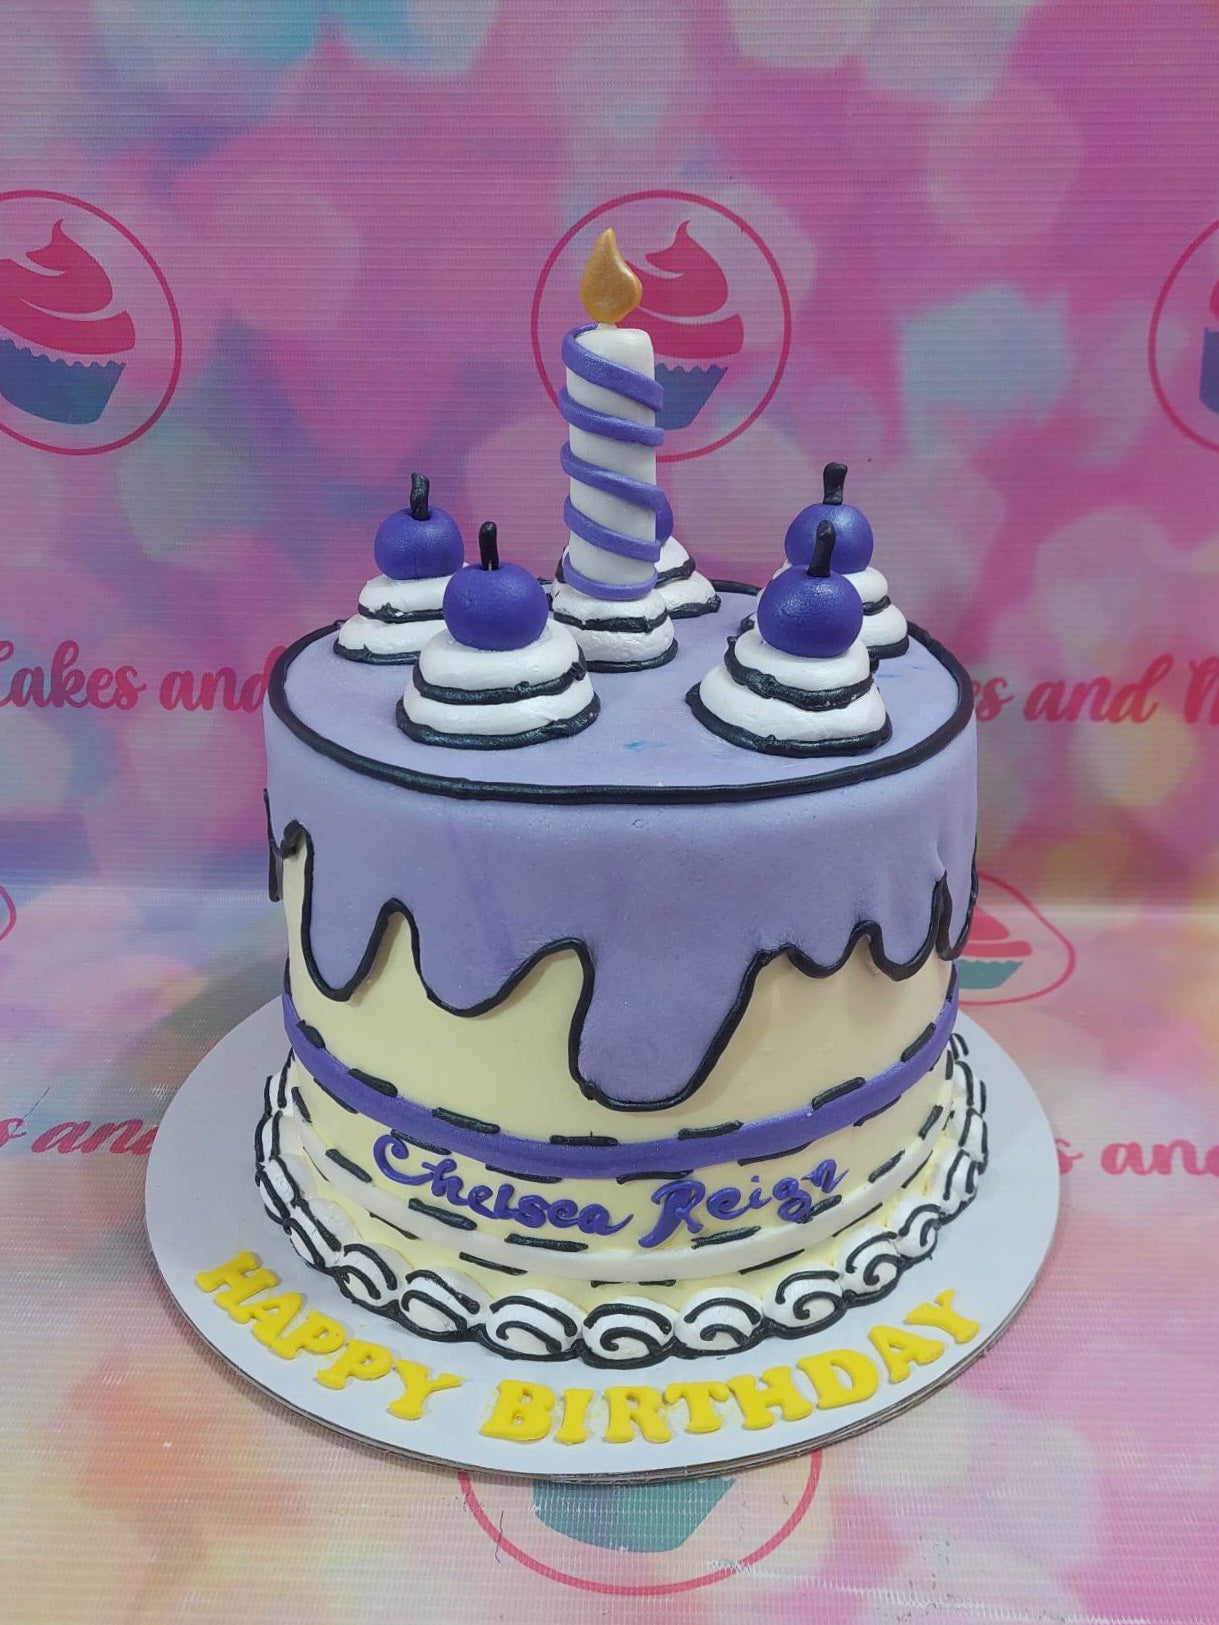 This decorated cartoon cake is the perfect birthday shout out for the animation TV show fan. It is custom-made with a cartoon-style featuring vibrant purple and violet colors. The cake is attractive and will definitely capture attention.